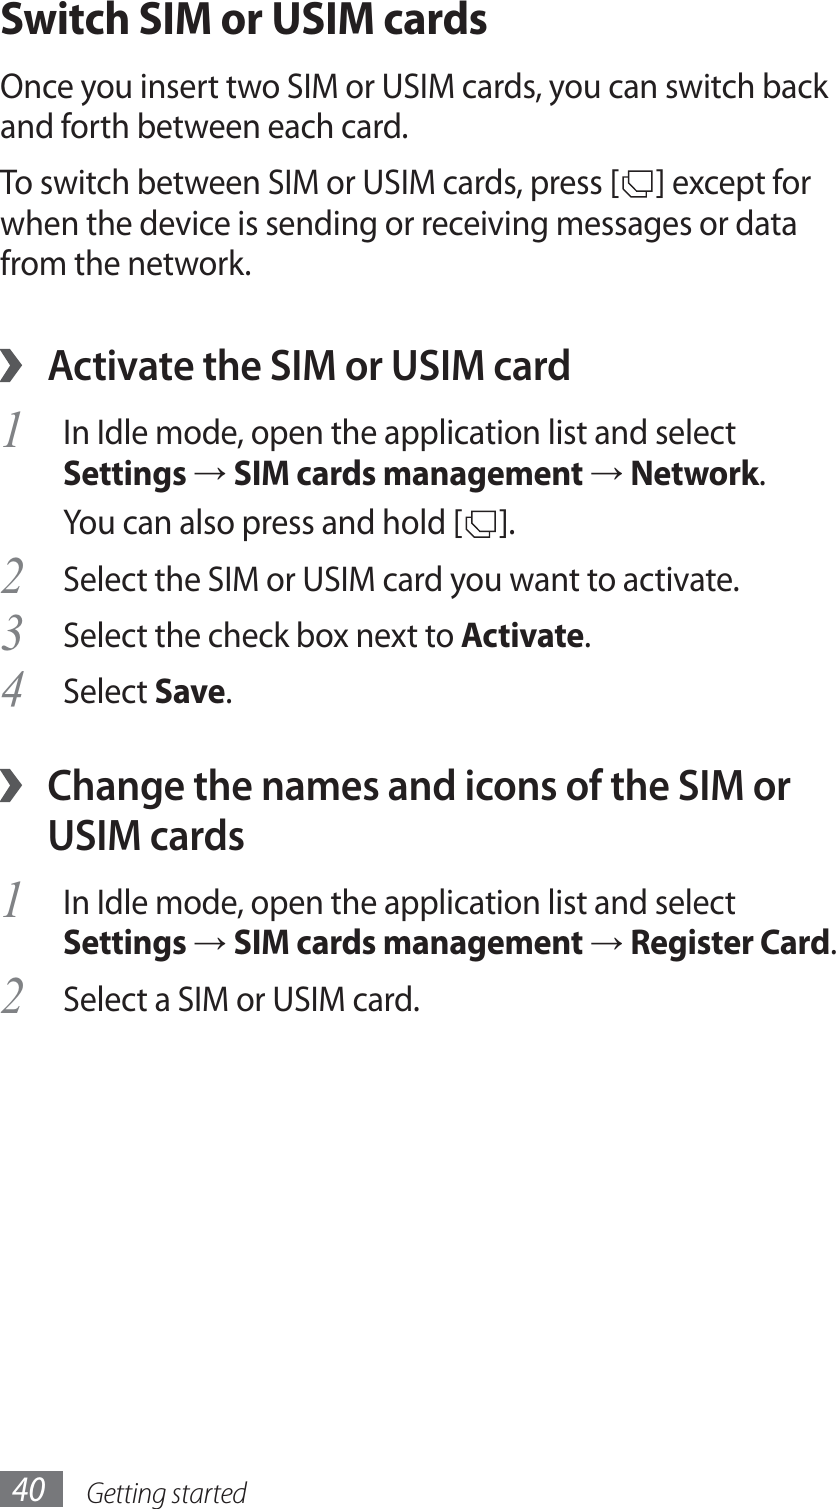 Getting started40Switch SIM or USIM cardsOnce you insert two SIM or USIM cards, you can switch back and forth between each card.To switch between SIM or USIM cards, press [ ] except for when the device is sending or receiving messages or data from the network. ›Activate the SIM or USIM cardIn Idle mode, open the application list and select 1 Settings → SIM cards management → Network.You can also press and hold [ ].Select the SIM or USIM card you want to activate.2 Select the check box next to 3 Activate.Select 4 Save. ›Change the names and icons of the SIM or USIM cardsIn Idle mode, open the application list and select 1 Settings → SIM cards management → Register Card.Select a SIM or USIM card.2 